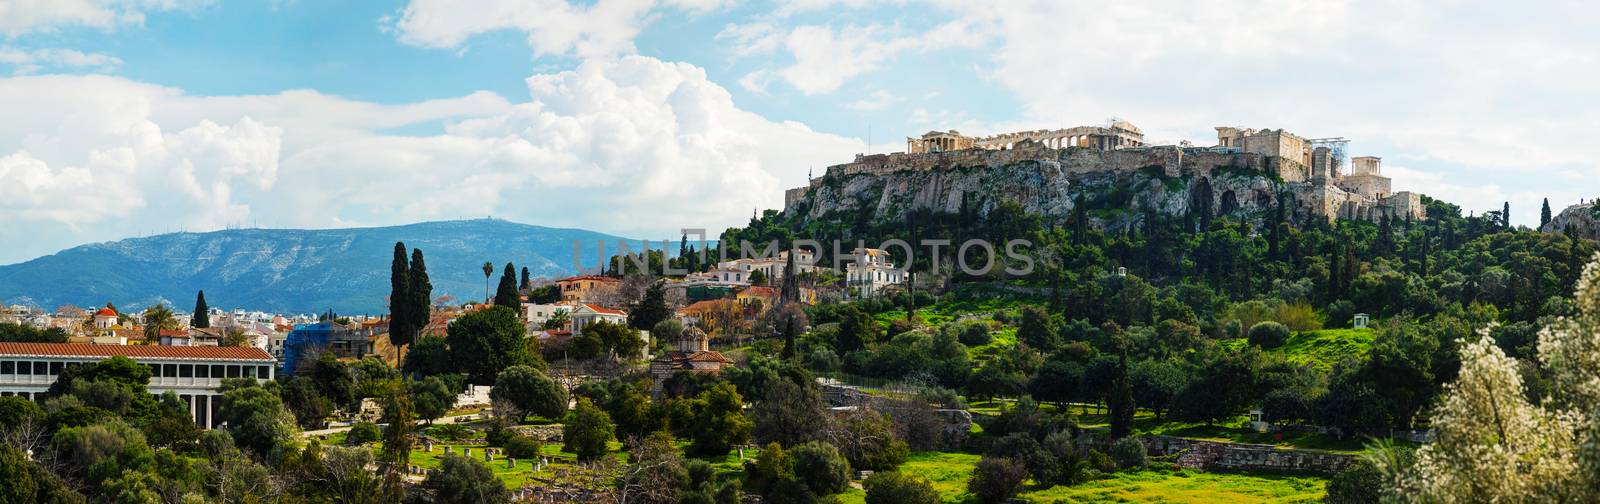 Overview of Acropolis in Athens, Greece by AndreyKr